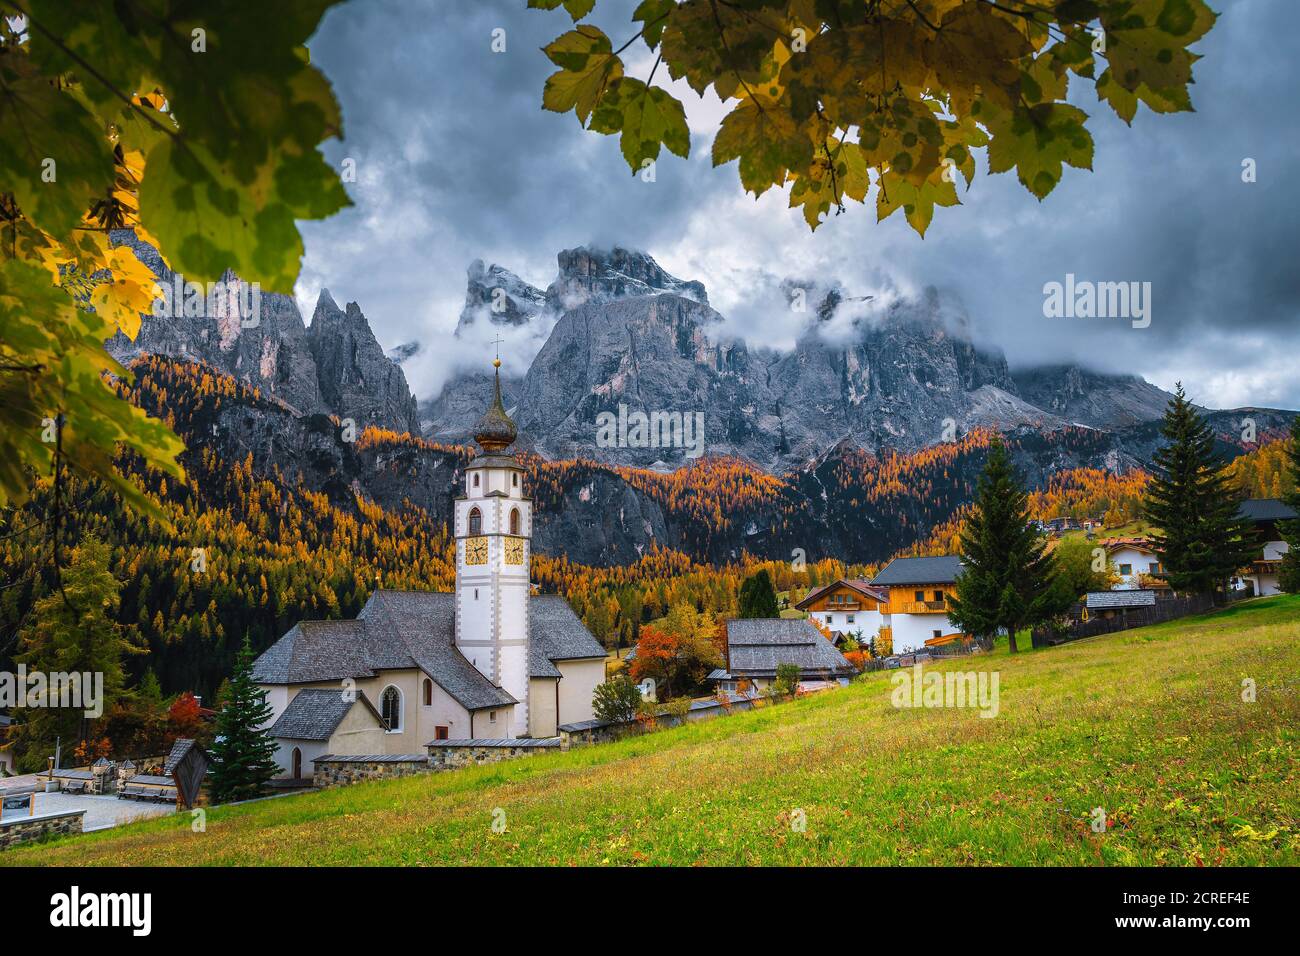 Amazing autumn scenery with colorful larch forest. Charming alpine village with beautiful church. Great hiking and touristic places, Colfosco, Dolomit Stock Photo